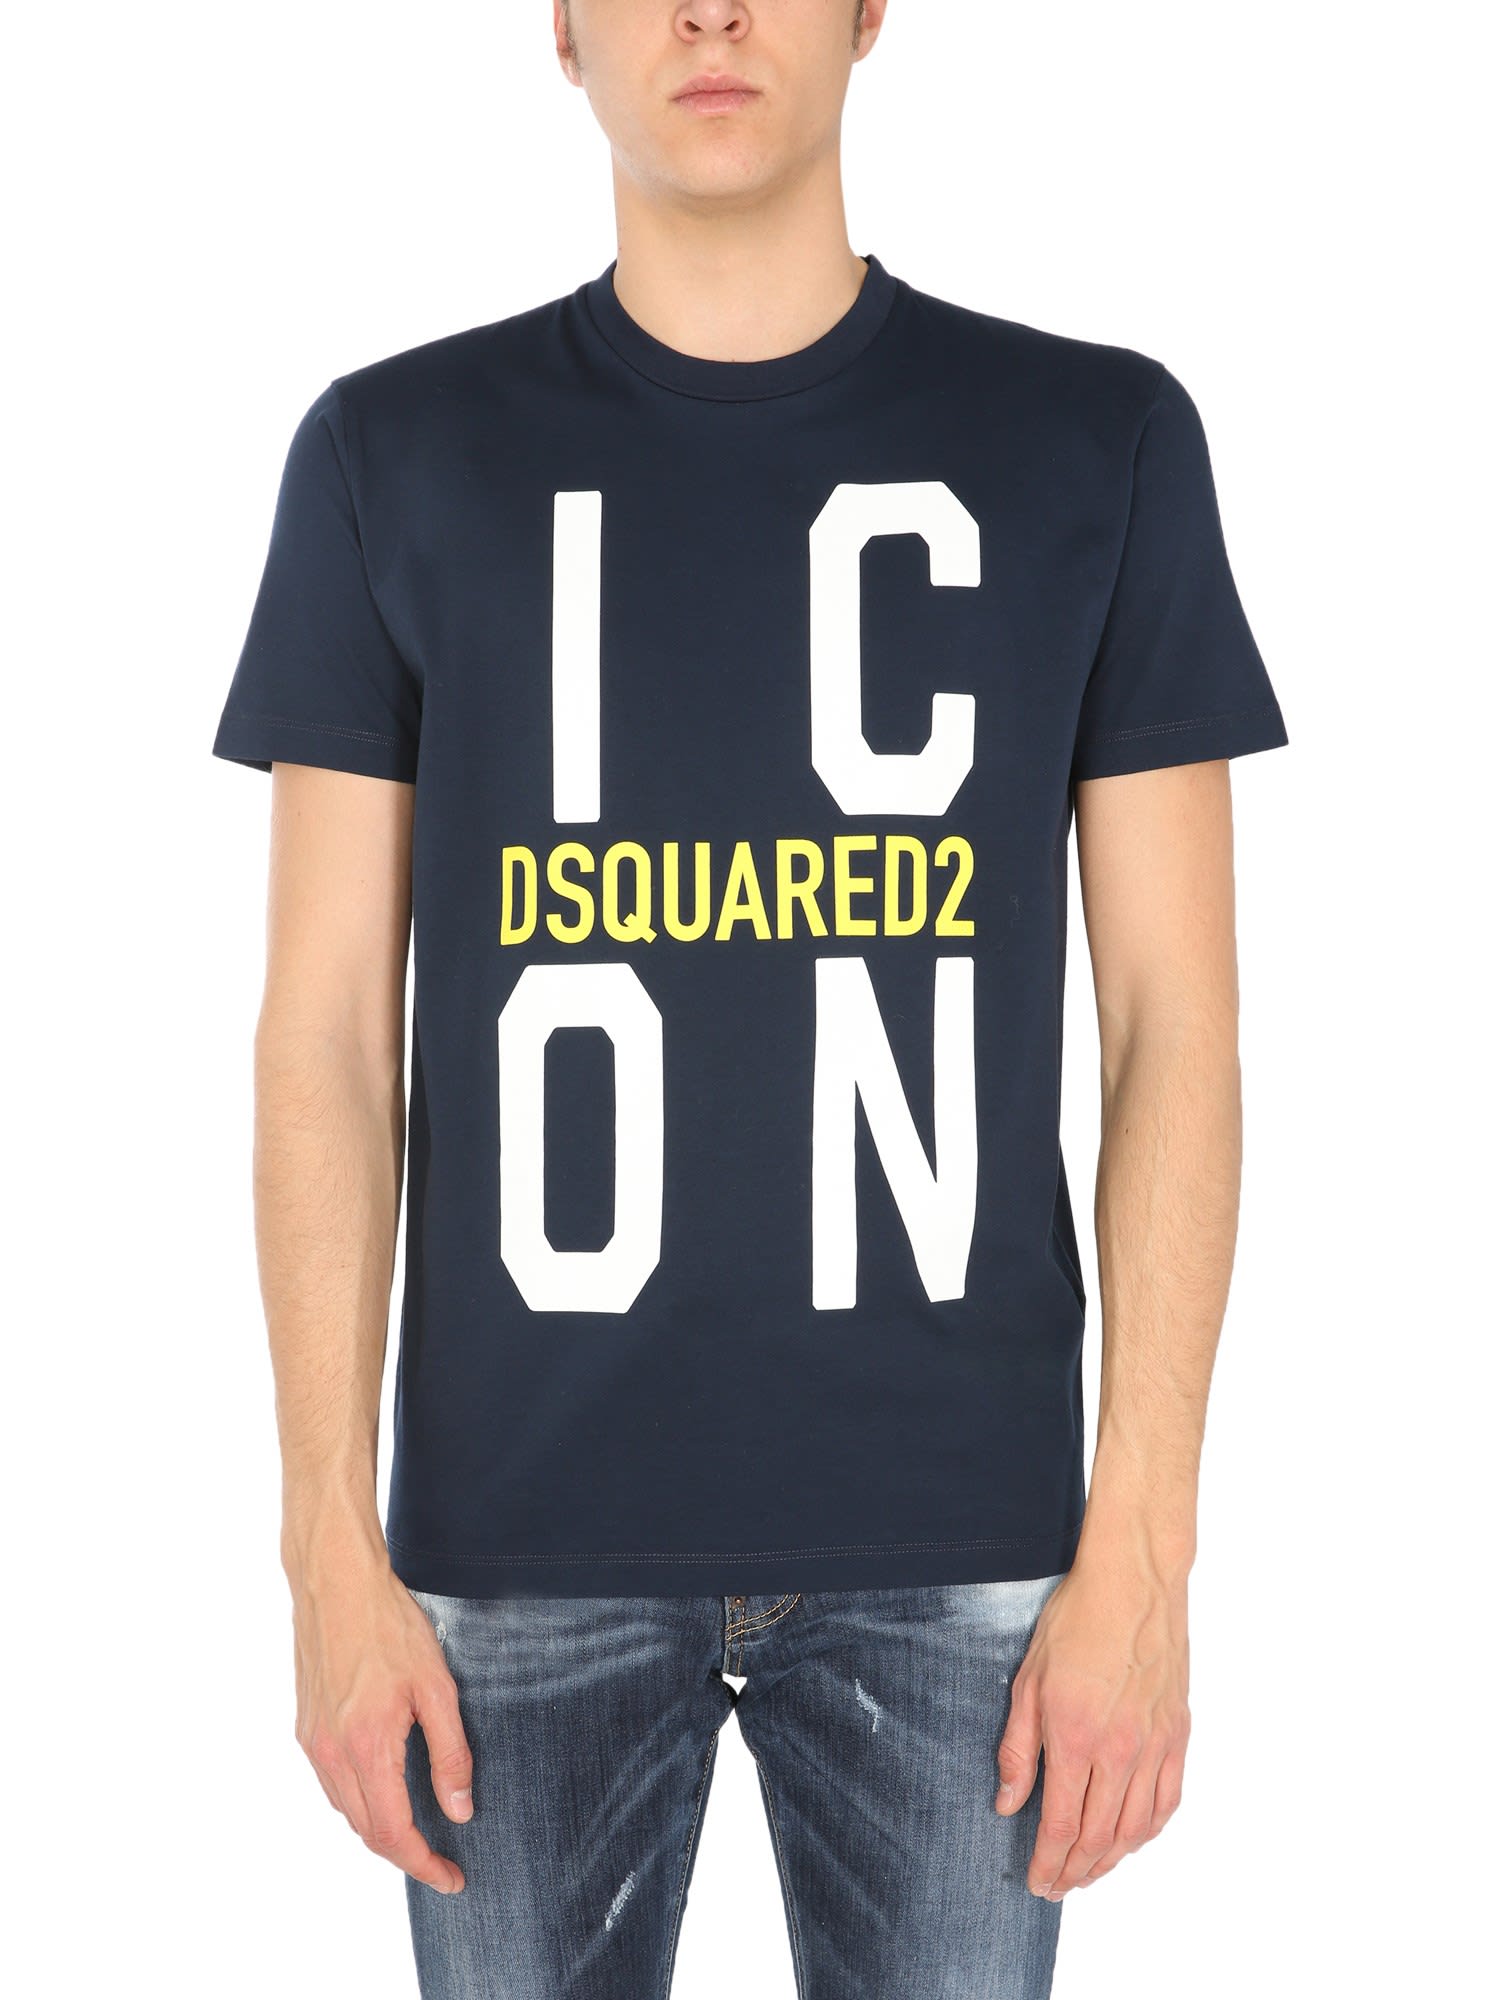 DSQUARED2 T-SHIRT WITH LOGO,S79GC0021 S23009478